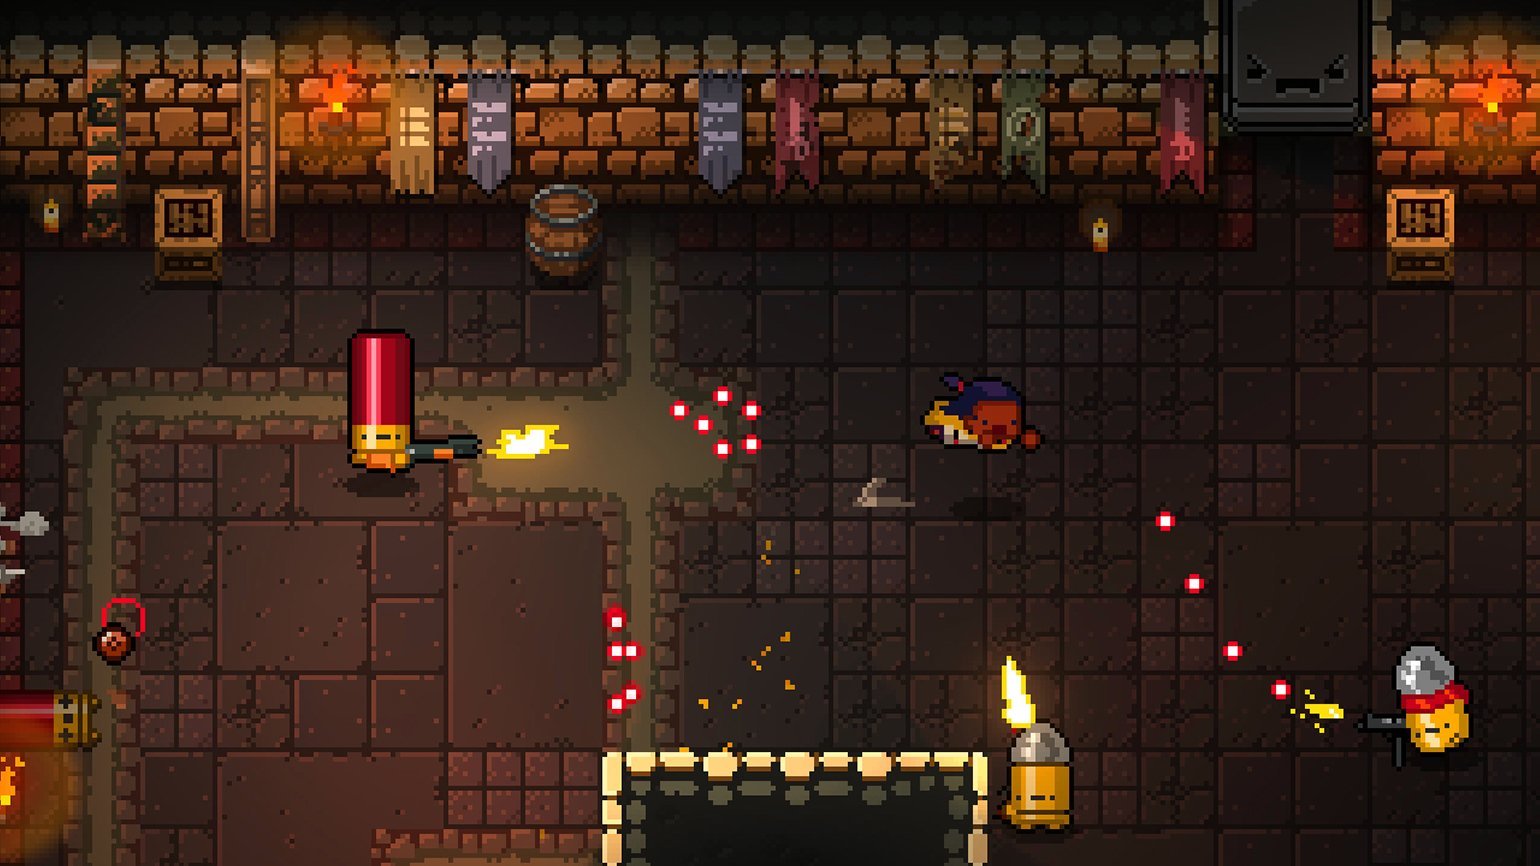 Corruption in the dungeon. Игра enter the Gungeon. Рогалик enter the Gungeon. Enter the Dungeon 2. Enter the Gungeon ps4.